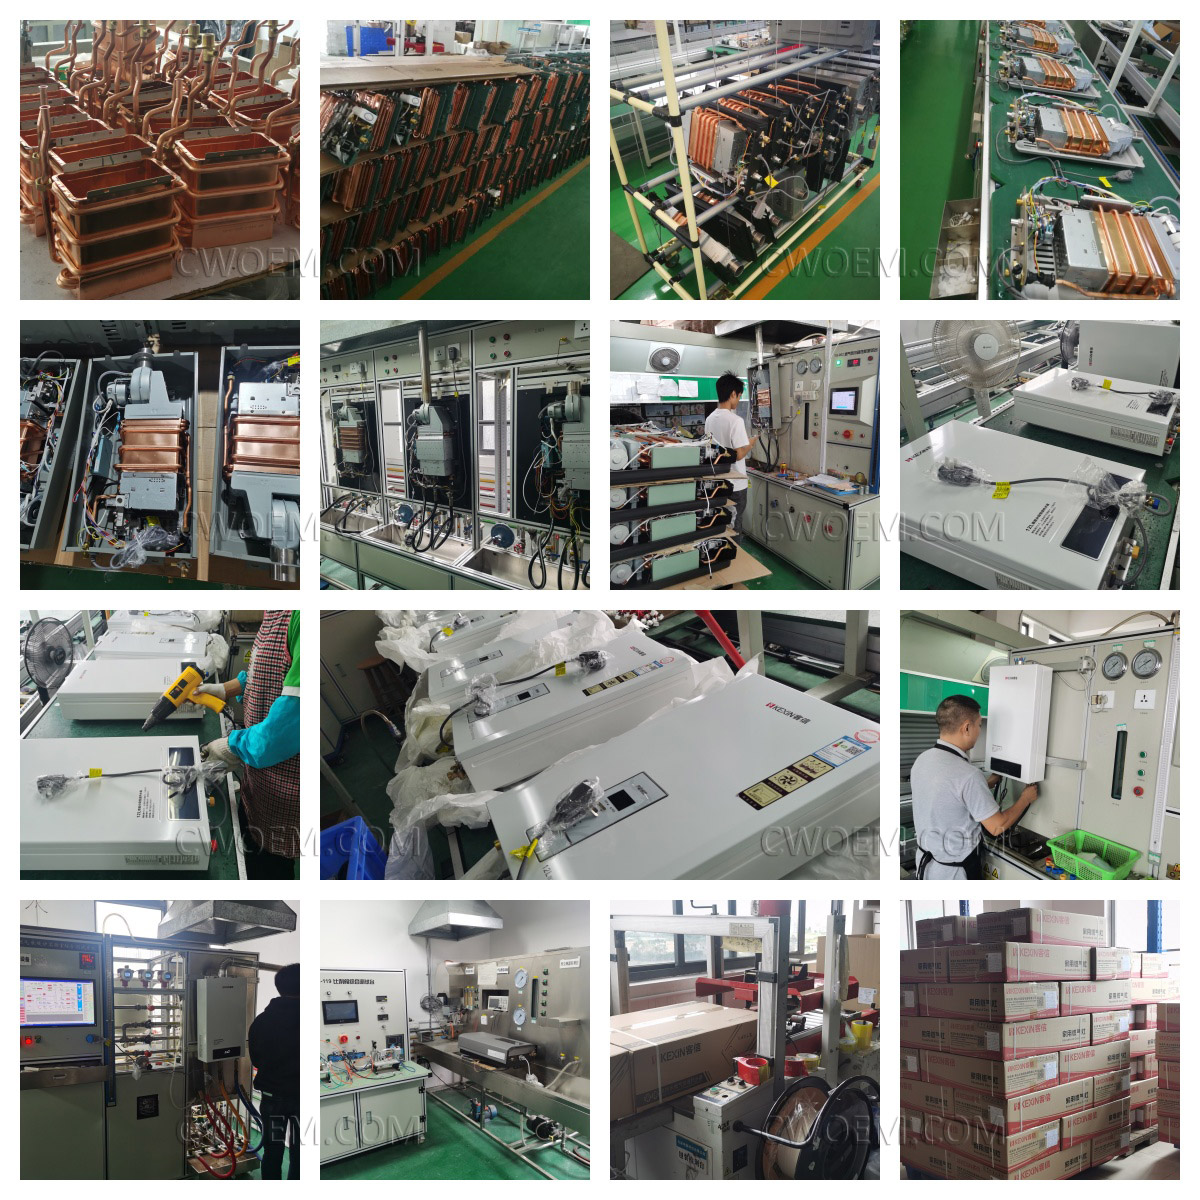 Chinese manufacturer and assembly enterprise of hot water equipment and water heaters